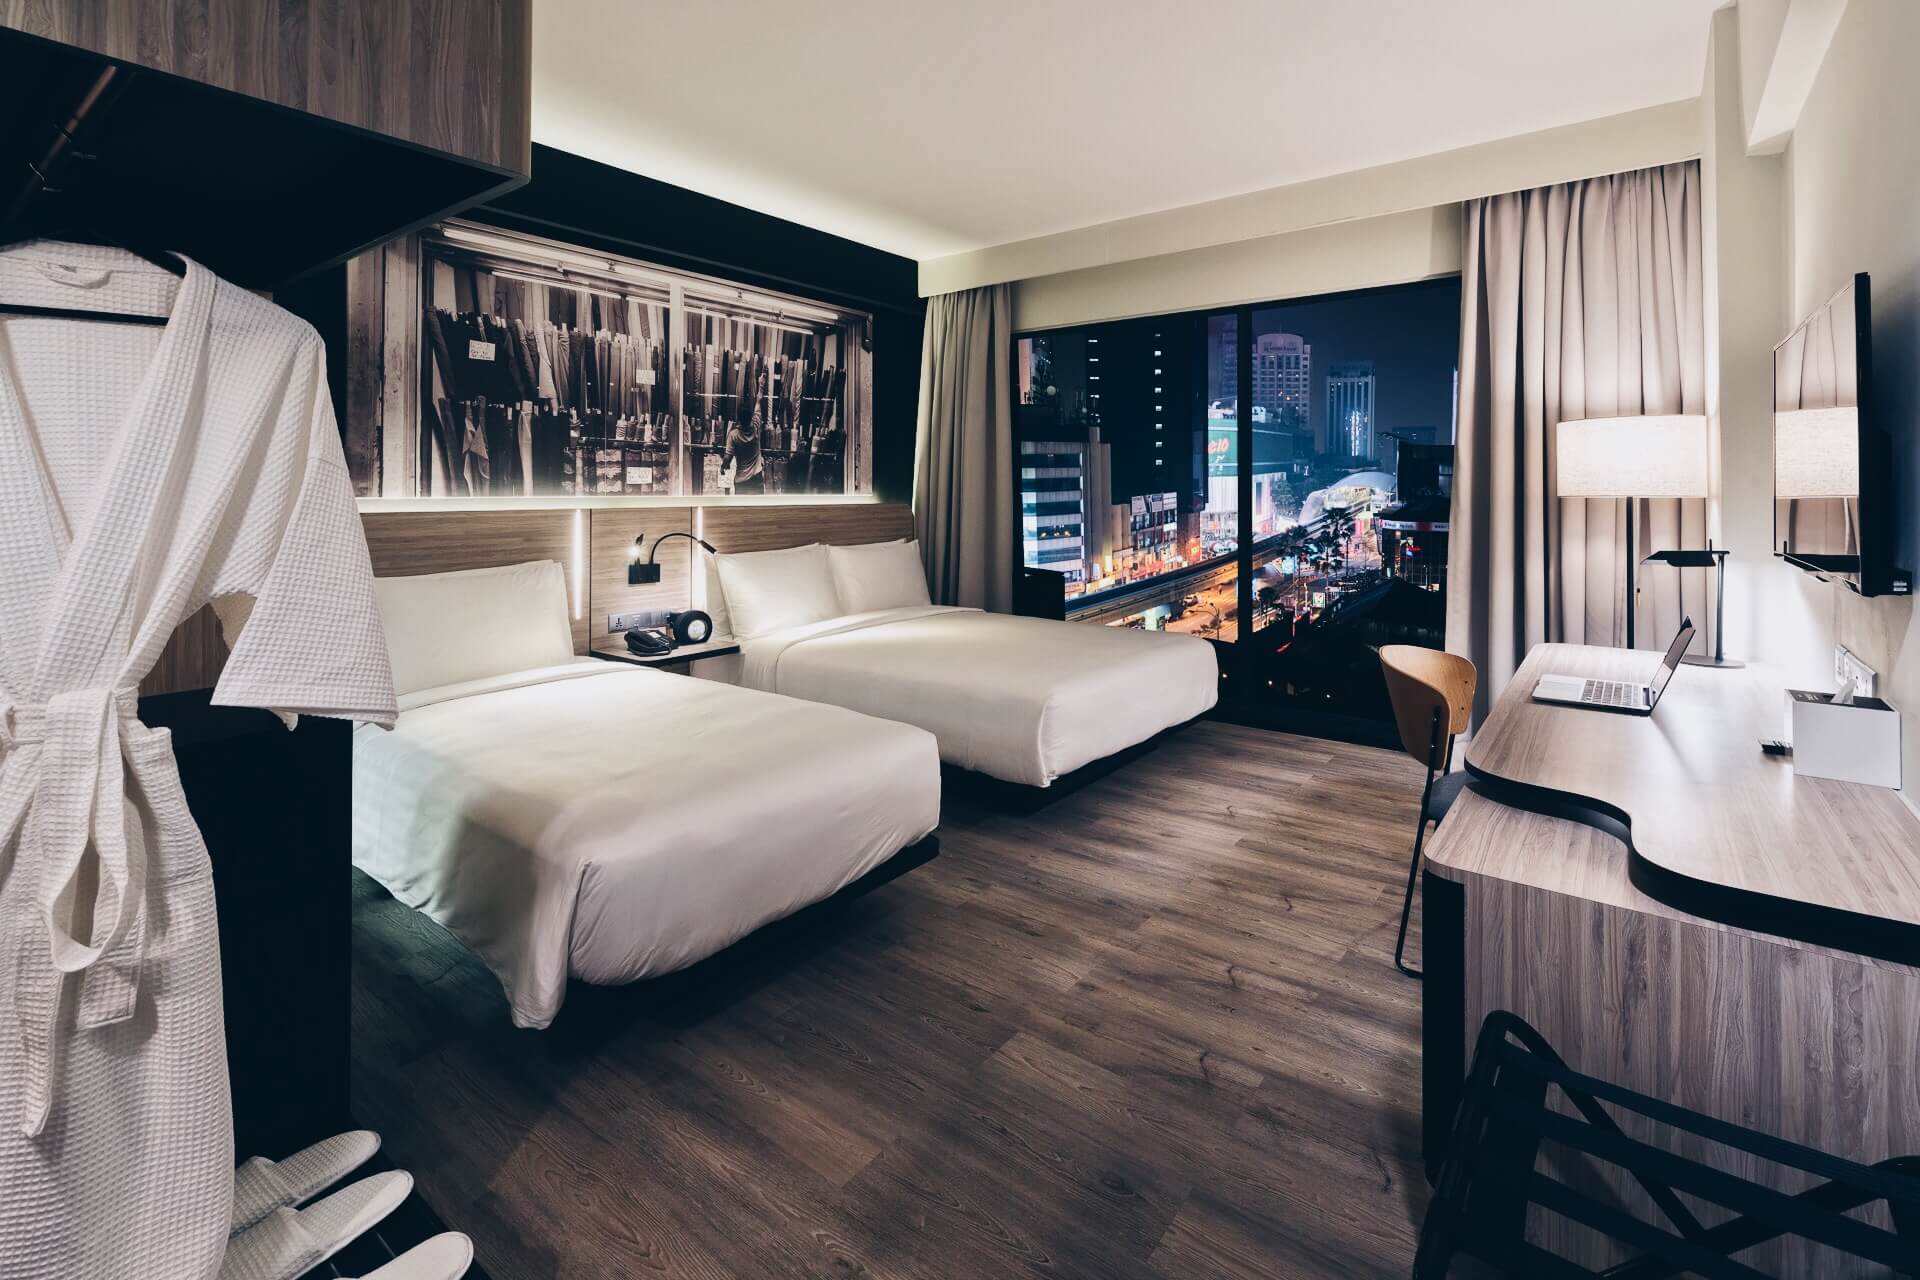 Deluxe Triple room at KL Journal Hotel with night city views